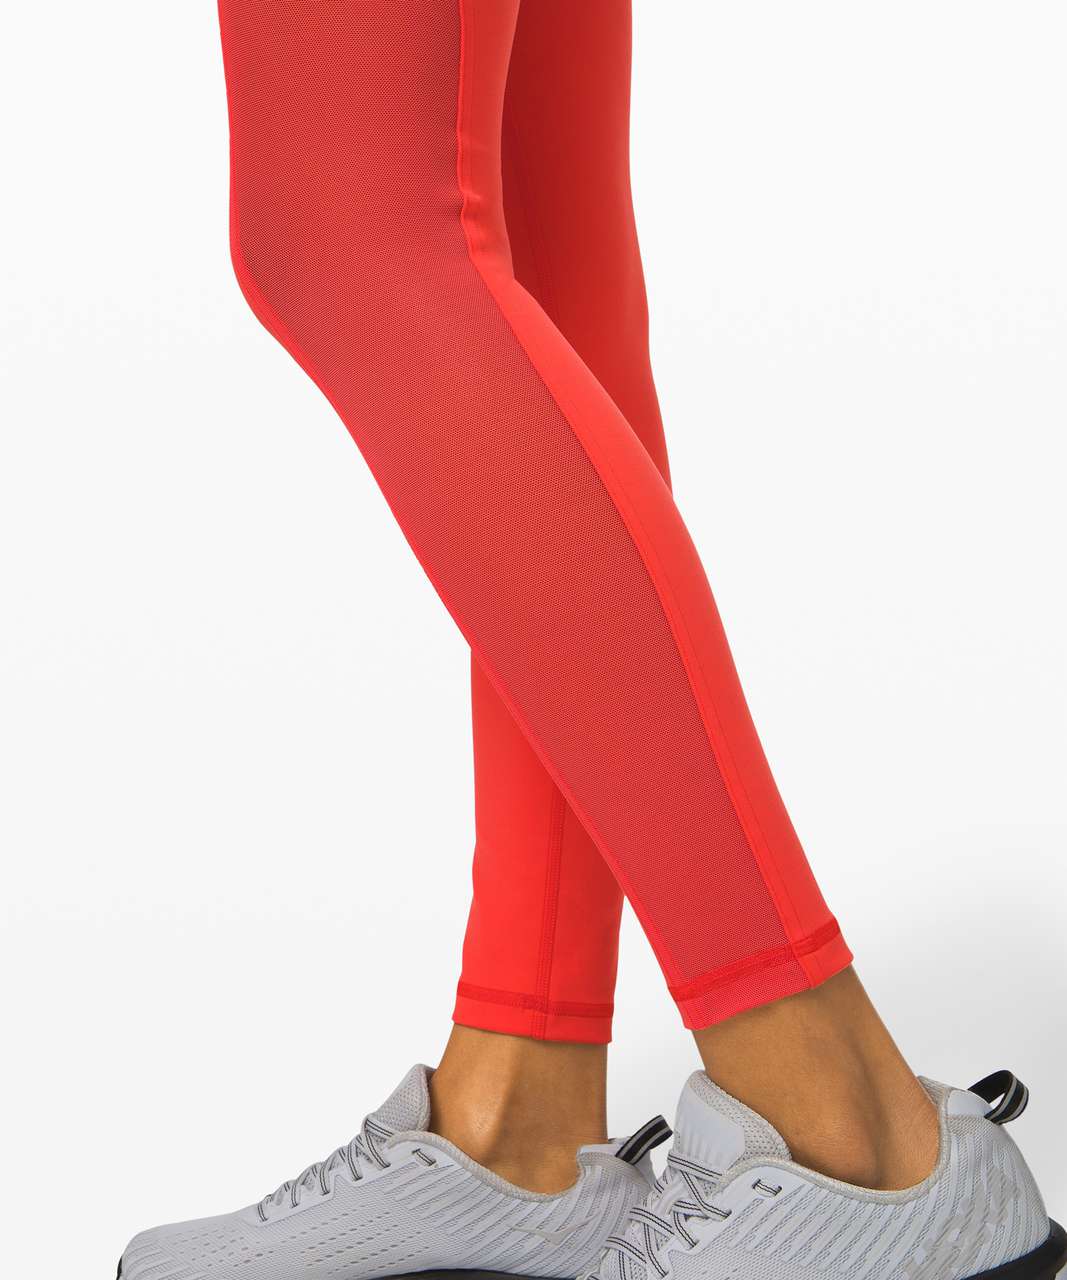 Why the Ultracor Hypersonic Is the 'Ultimate Legging' For Ladies - Maxim